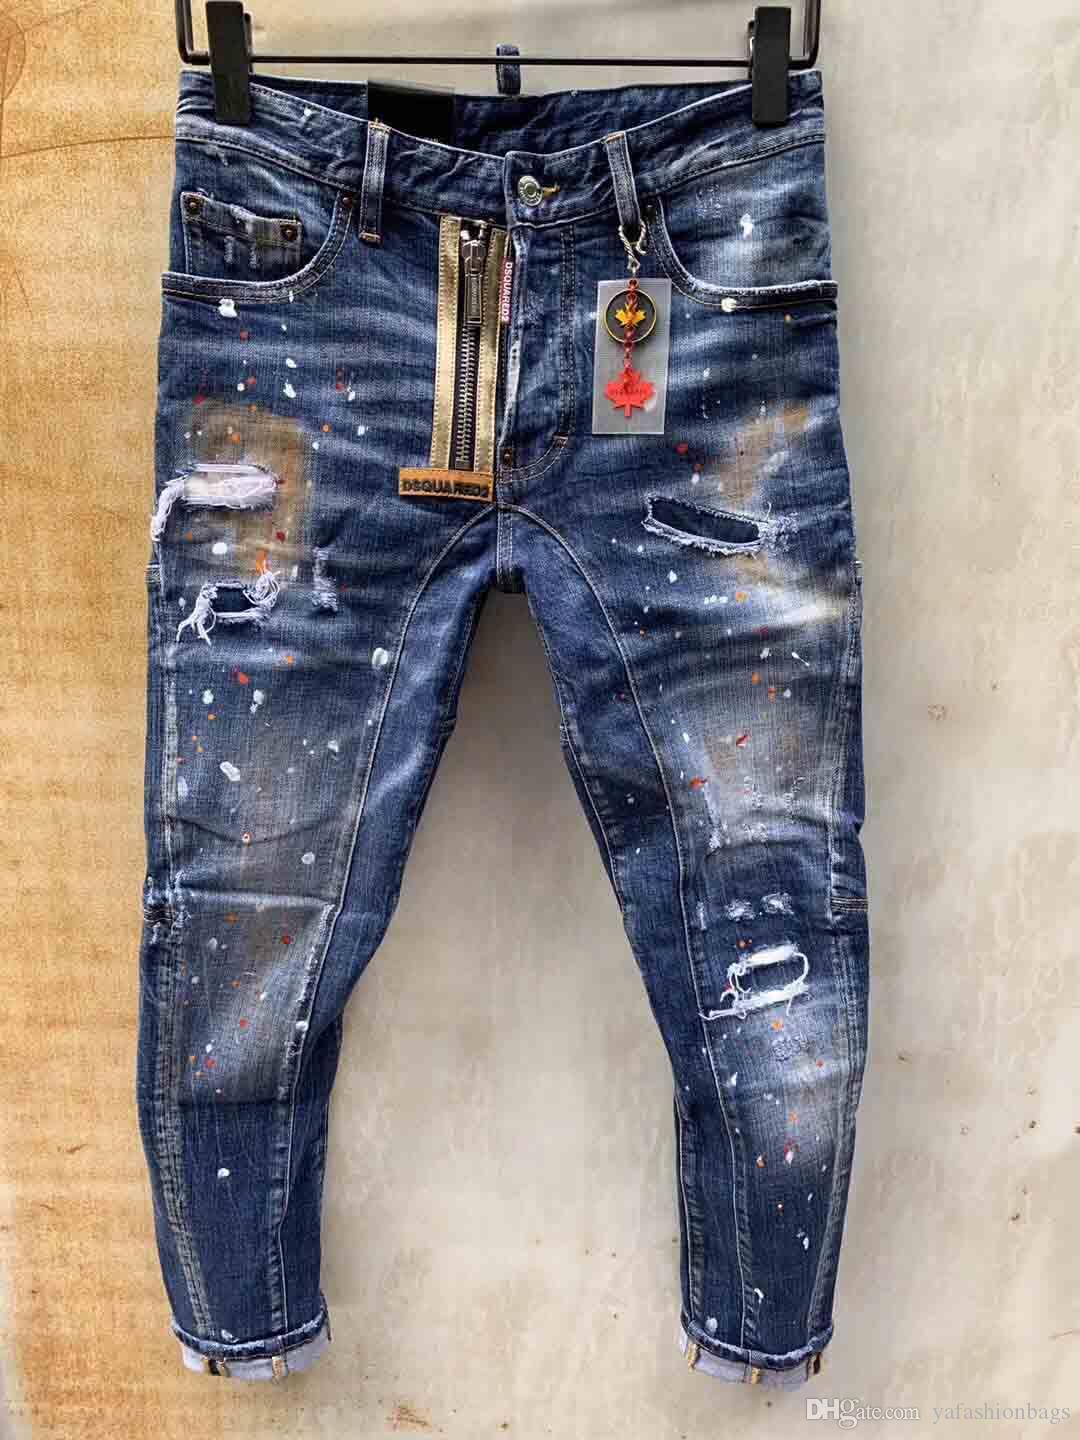 dsquared2 jeans price